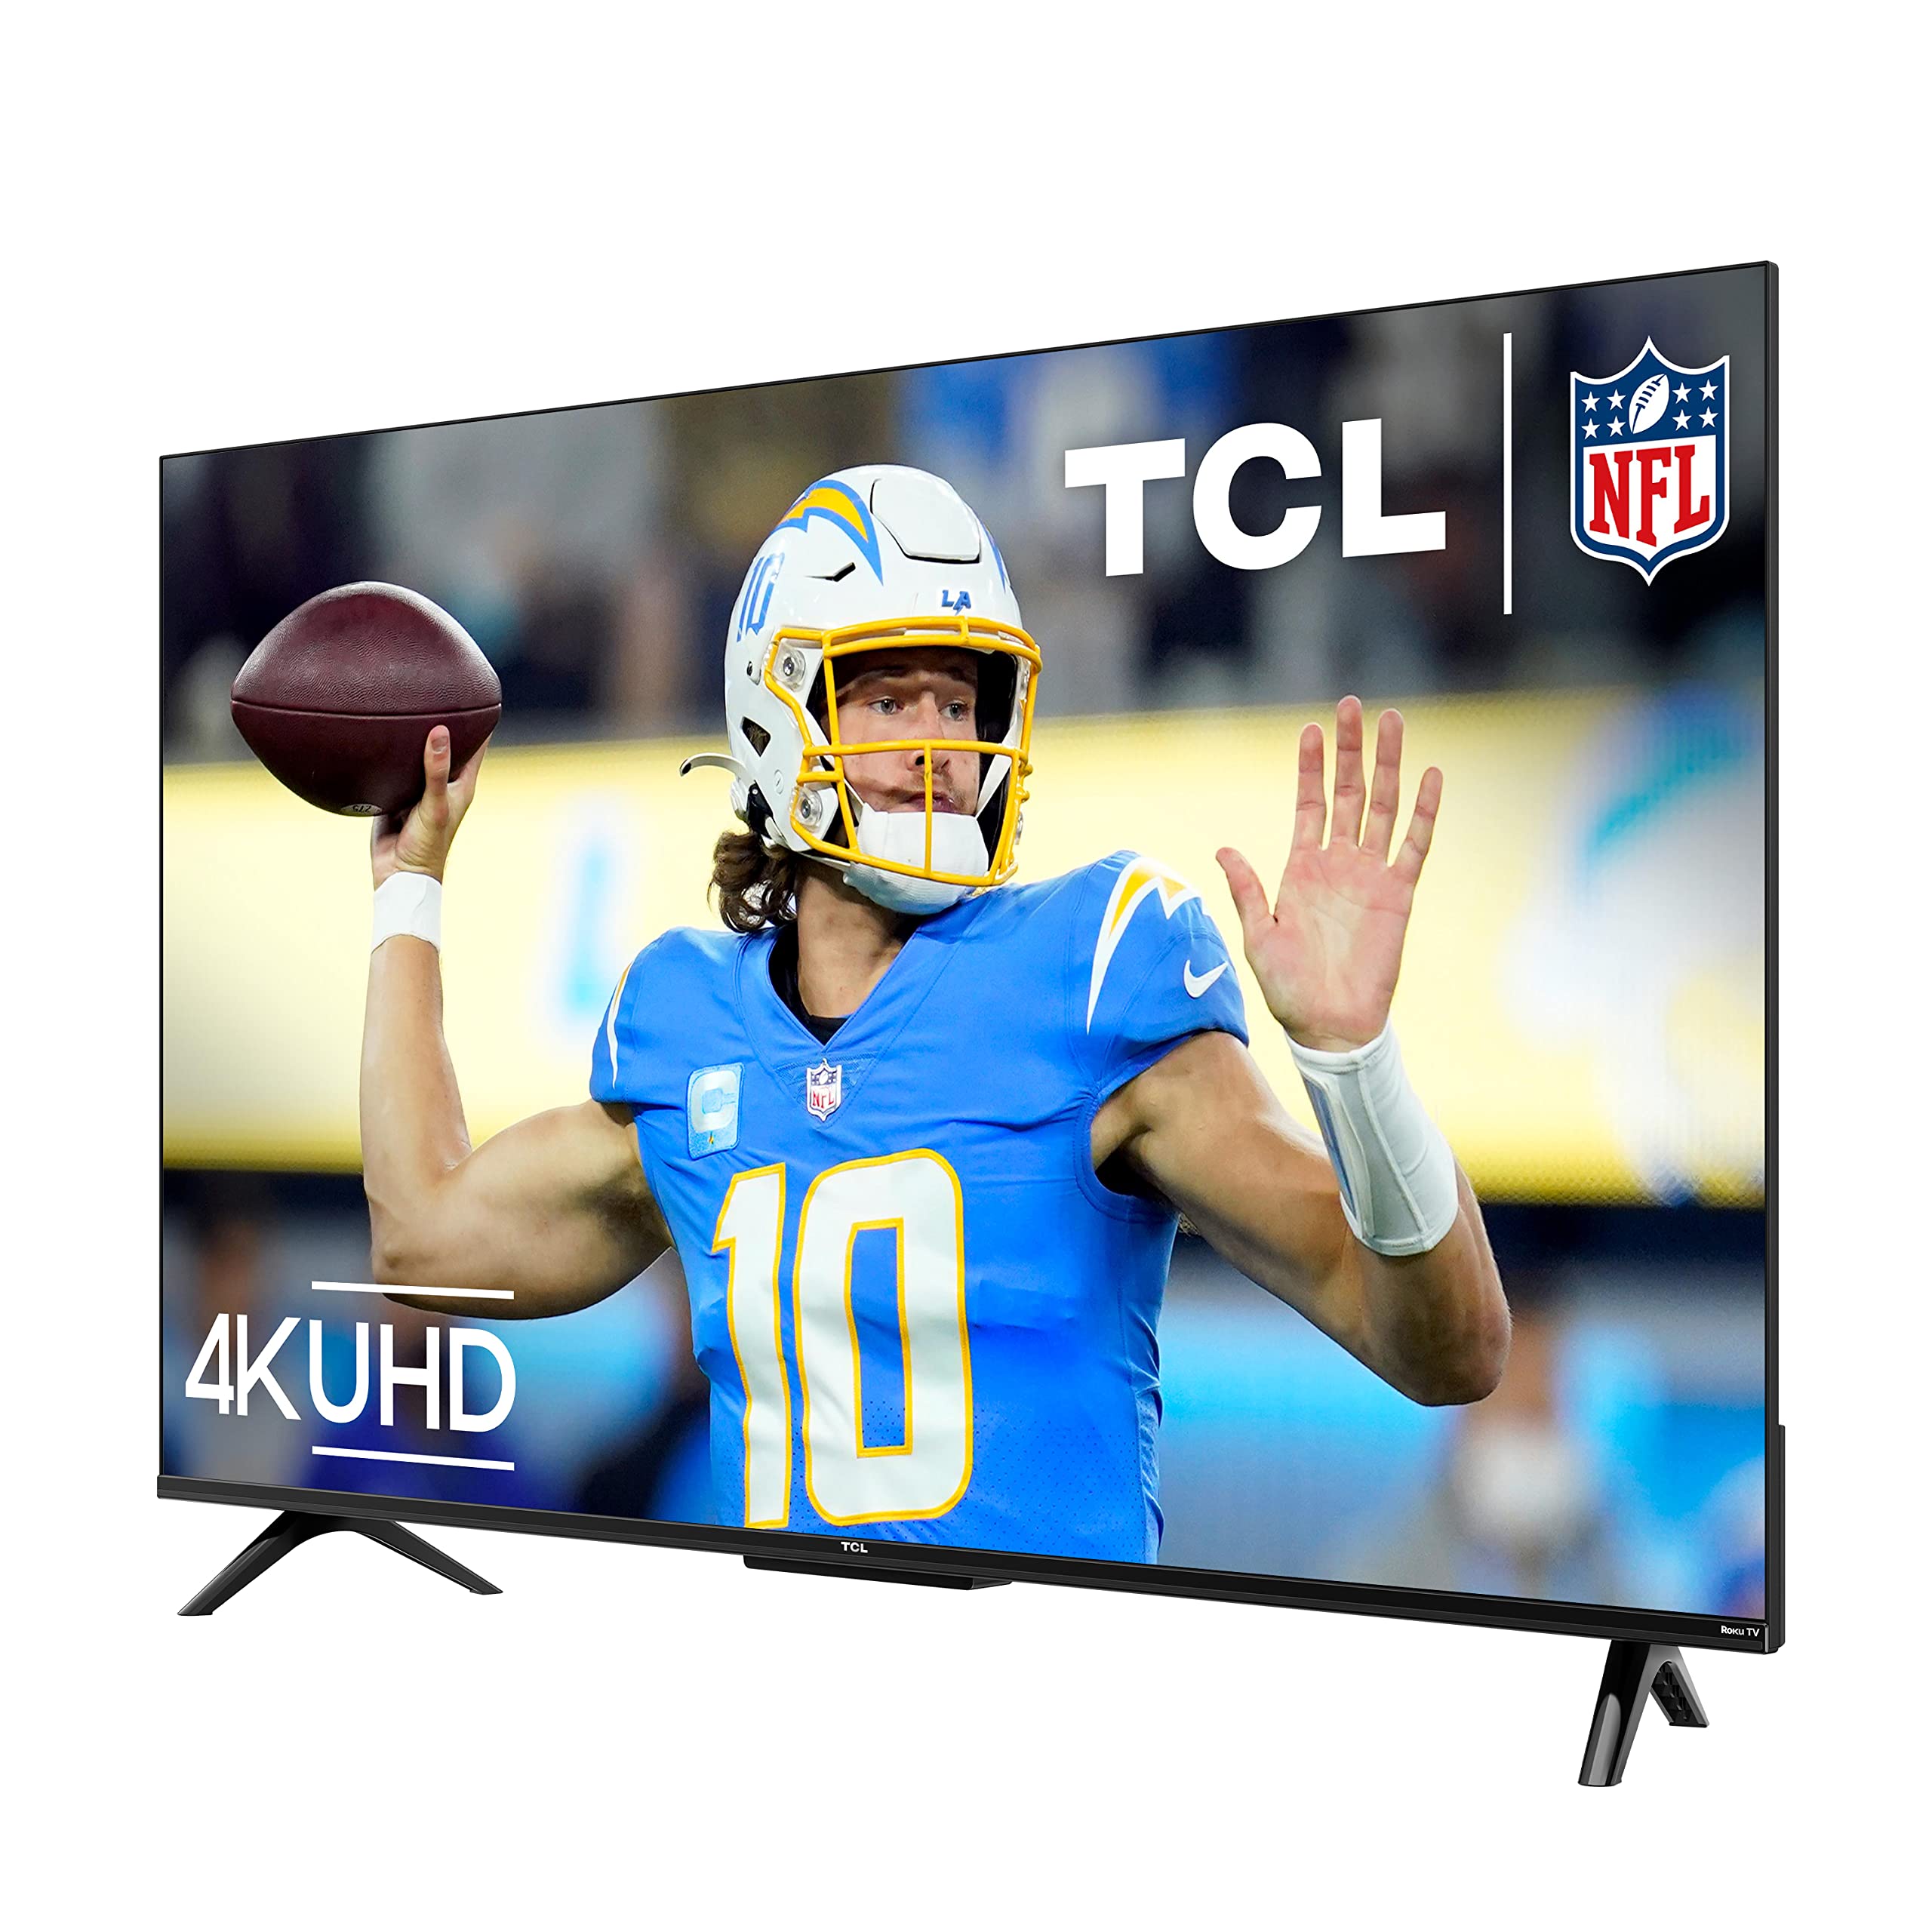 TCL 43-Inch Class S4 4K LED Smart TV with Roku TV (43S450R, 2023 Model), Dolby Vision, HDR, Dolby Atmos, Works with Alexa, Google Assistant and Apple HomeKit Compatibility, Streaming UHD Television